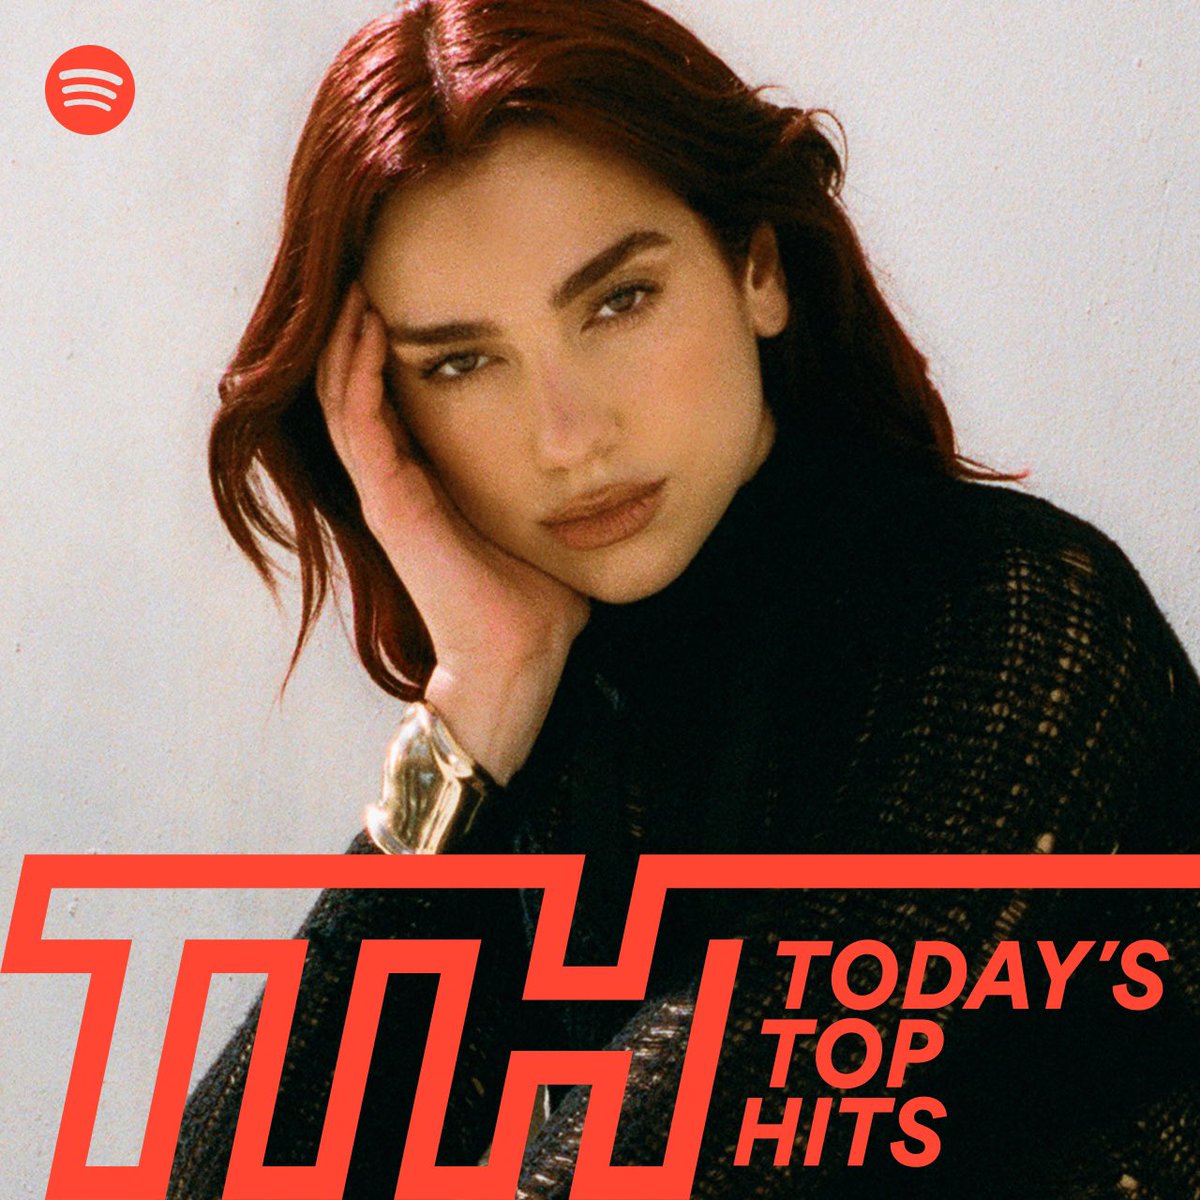 Listen to 'Illusion” on @spotify’s Today’s Top Hits playlist 🌀 open.spotify.com/playlist/37i9d…